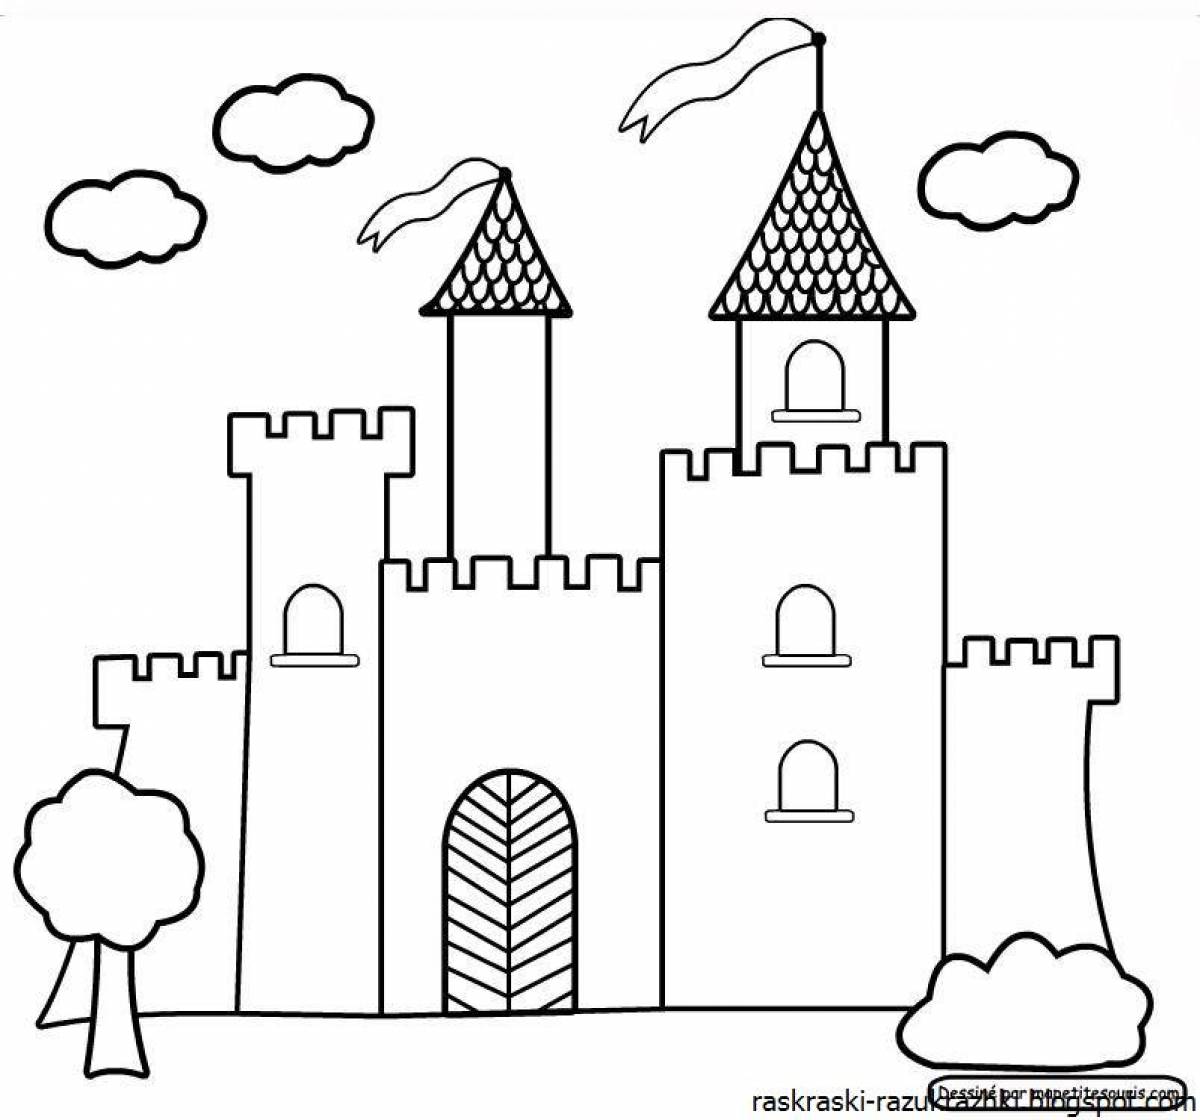 Exquisite castle coloring book for kids